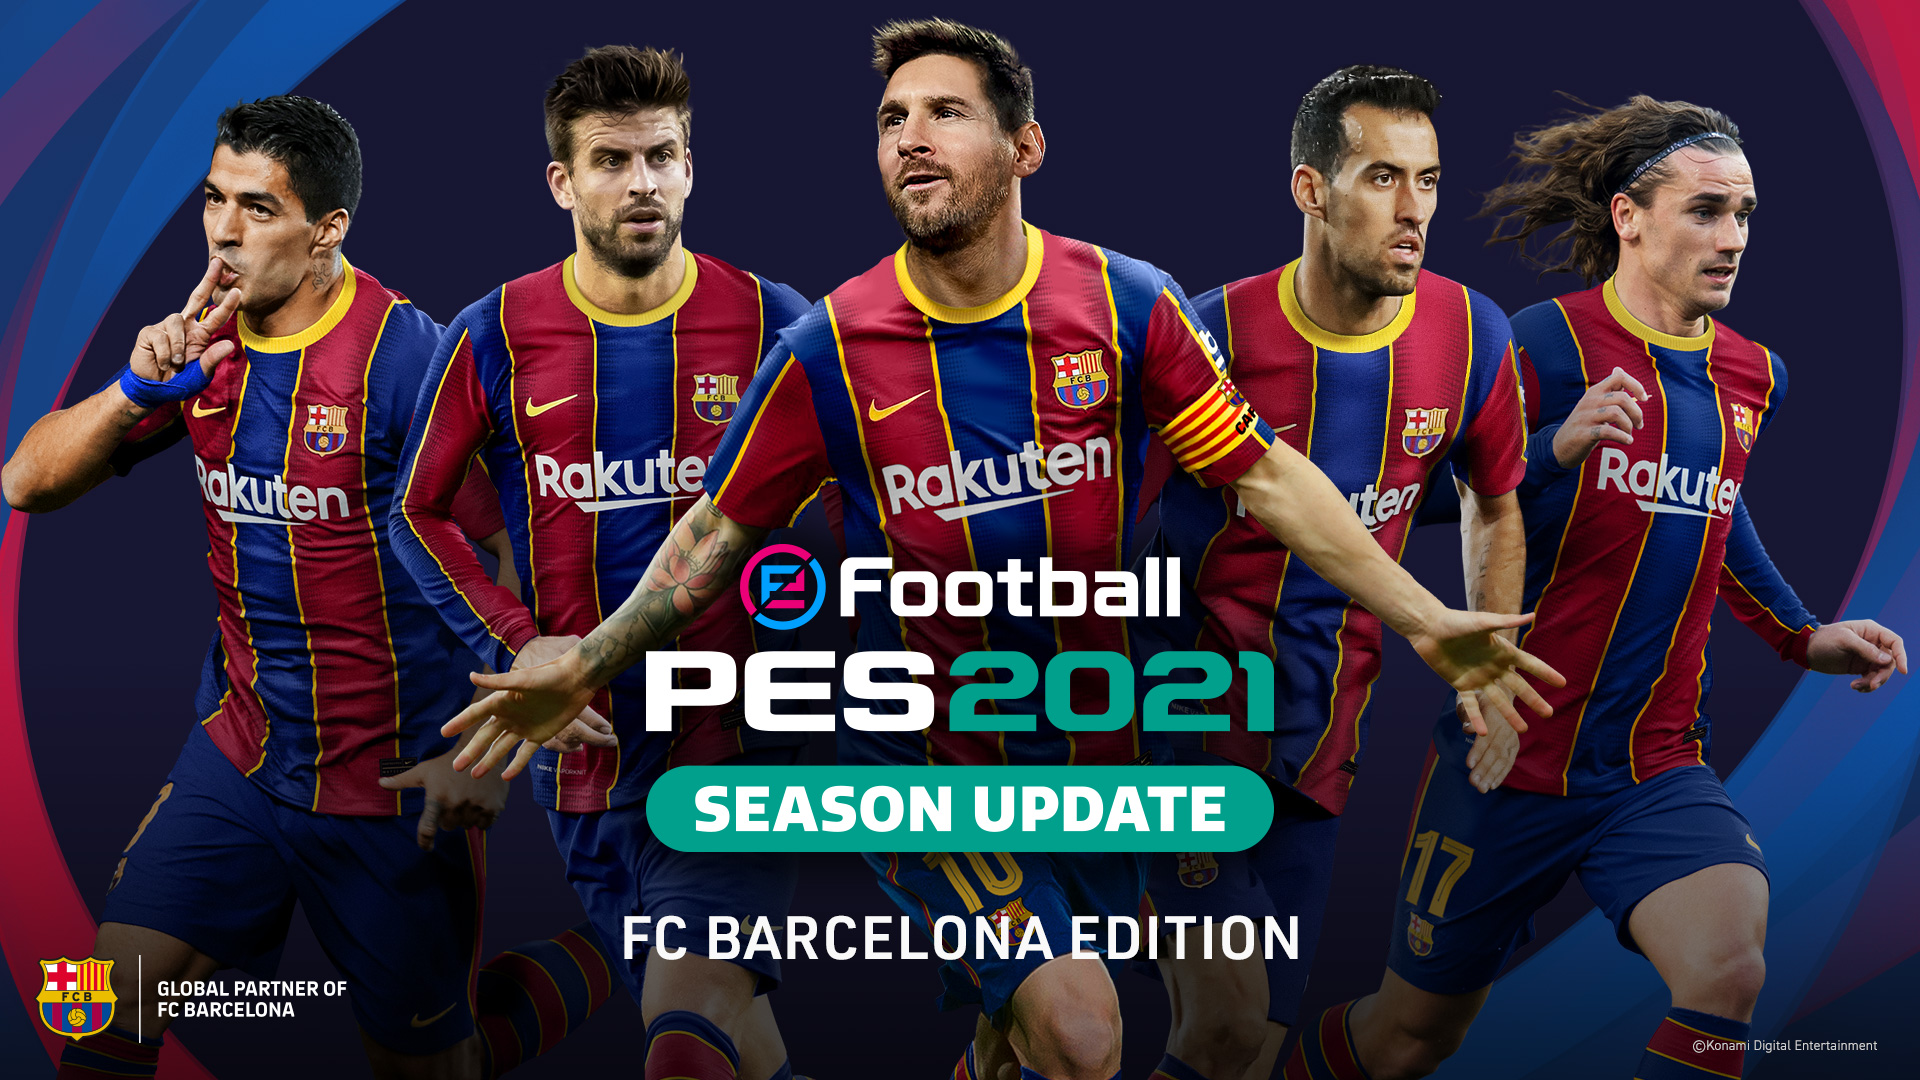 efootball pes 2021 release date